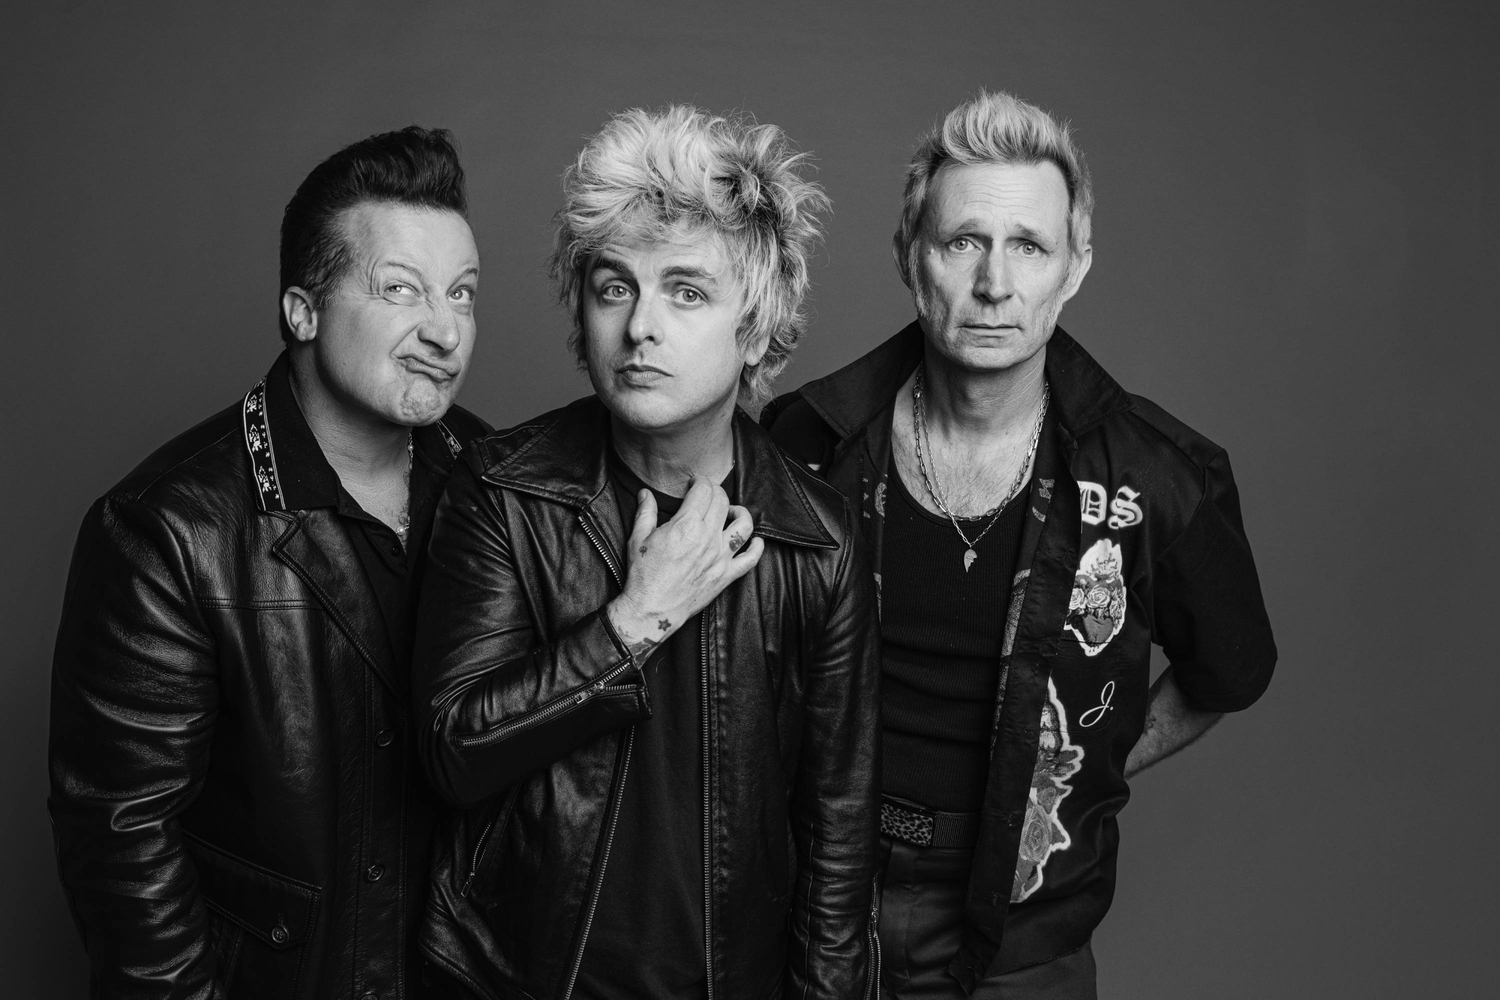 Green Day reflect on politics in punk, latest album ‘Saviors’ and their epic career so far